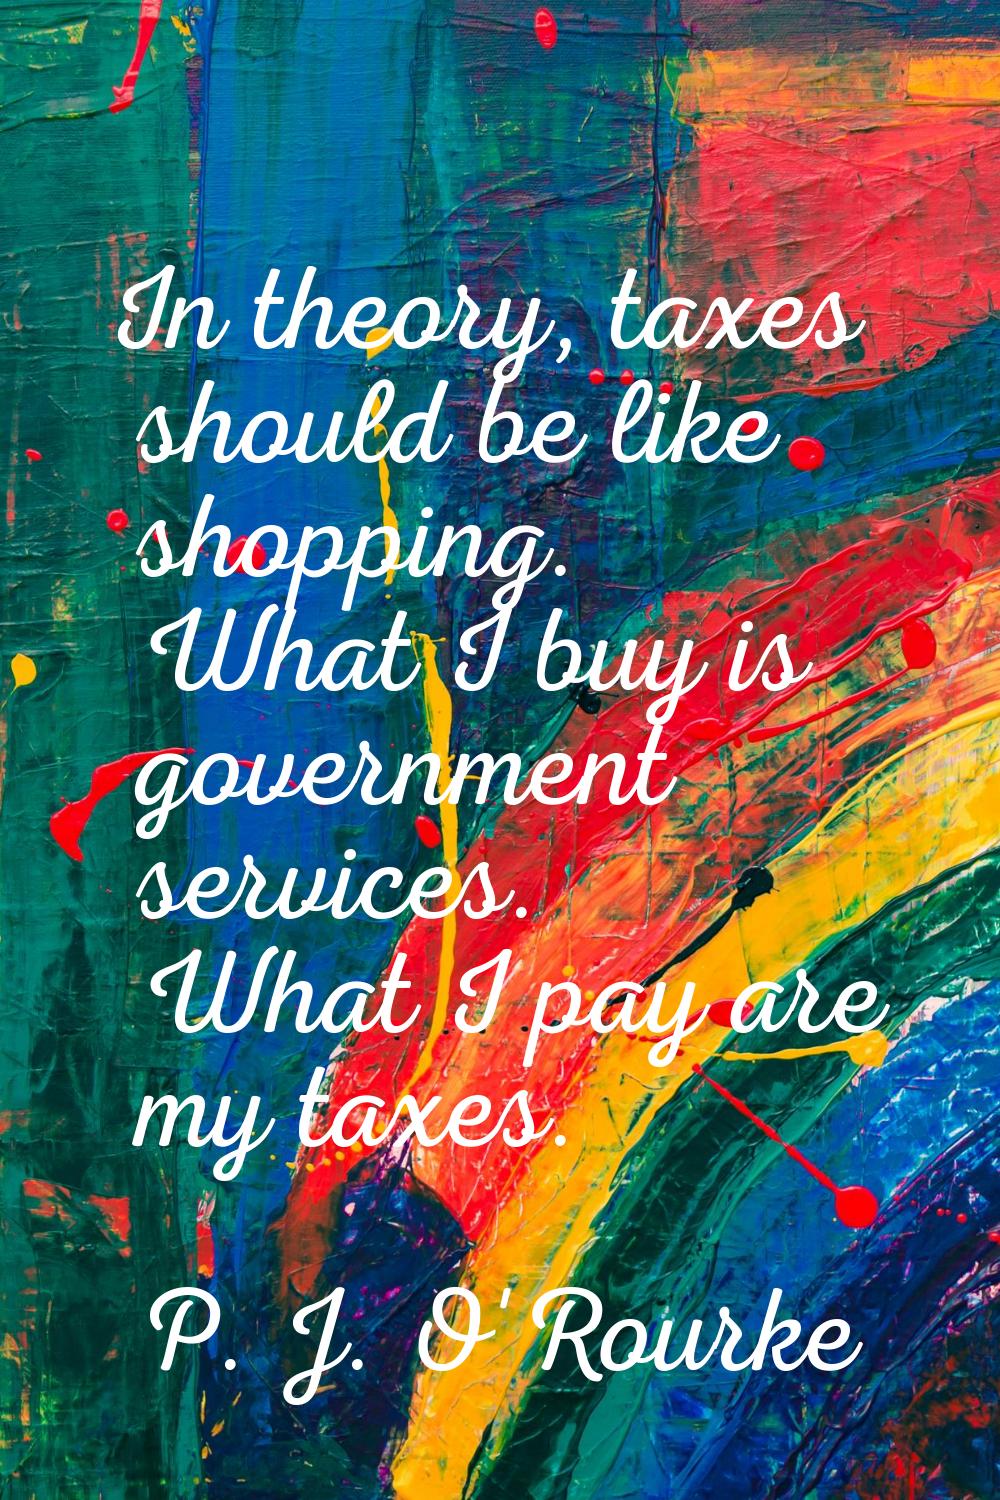 In theory, taxes should be like shopping. What I buy is government services. What I pay are my taxe